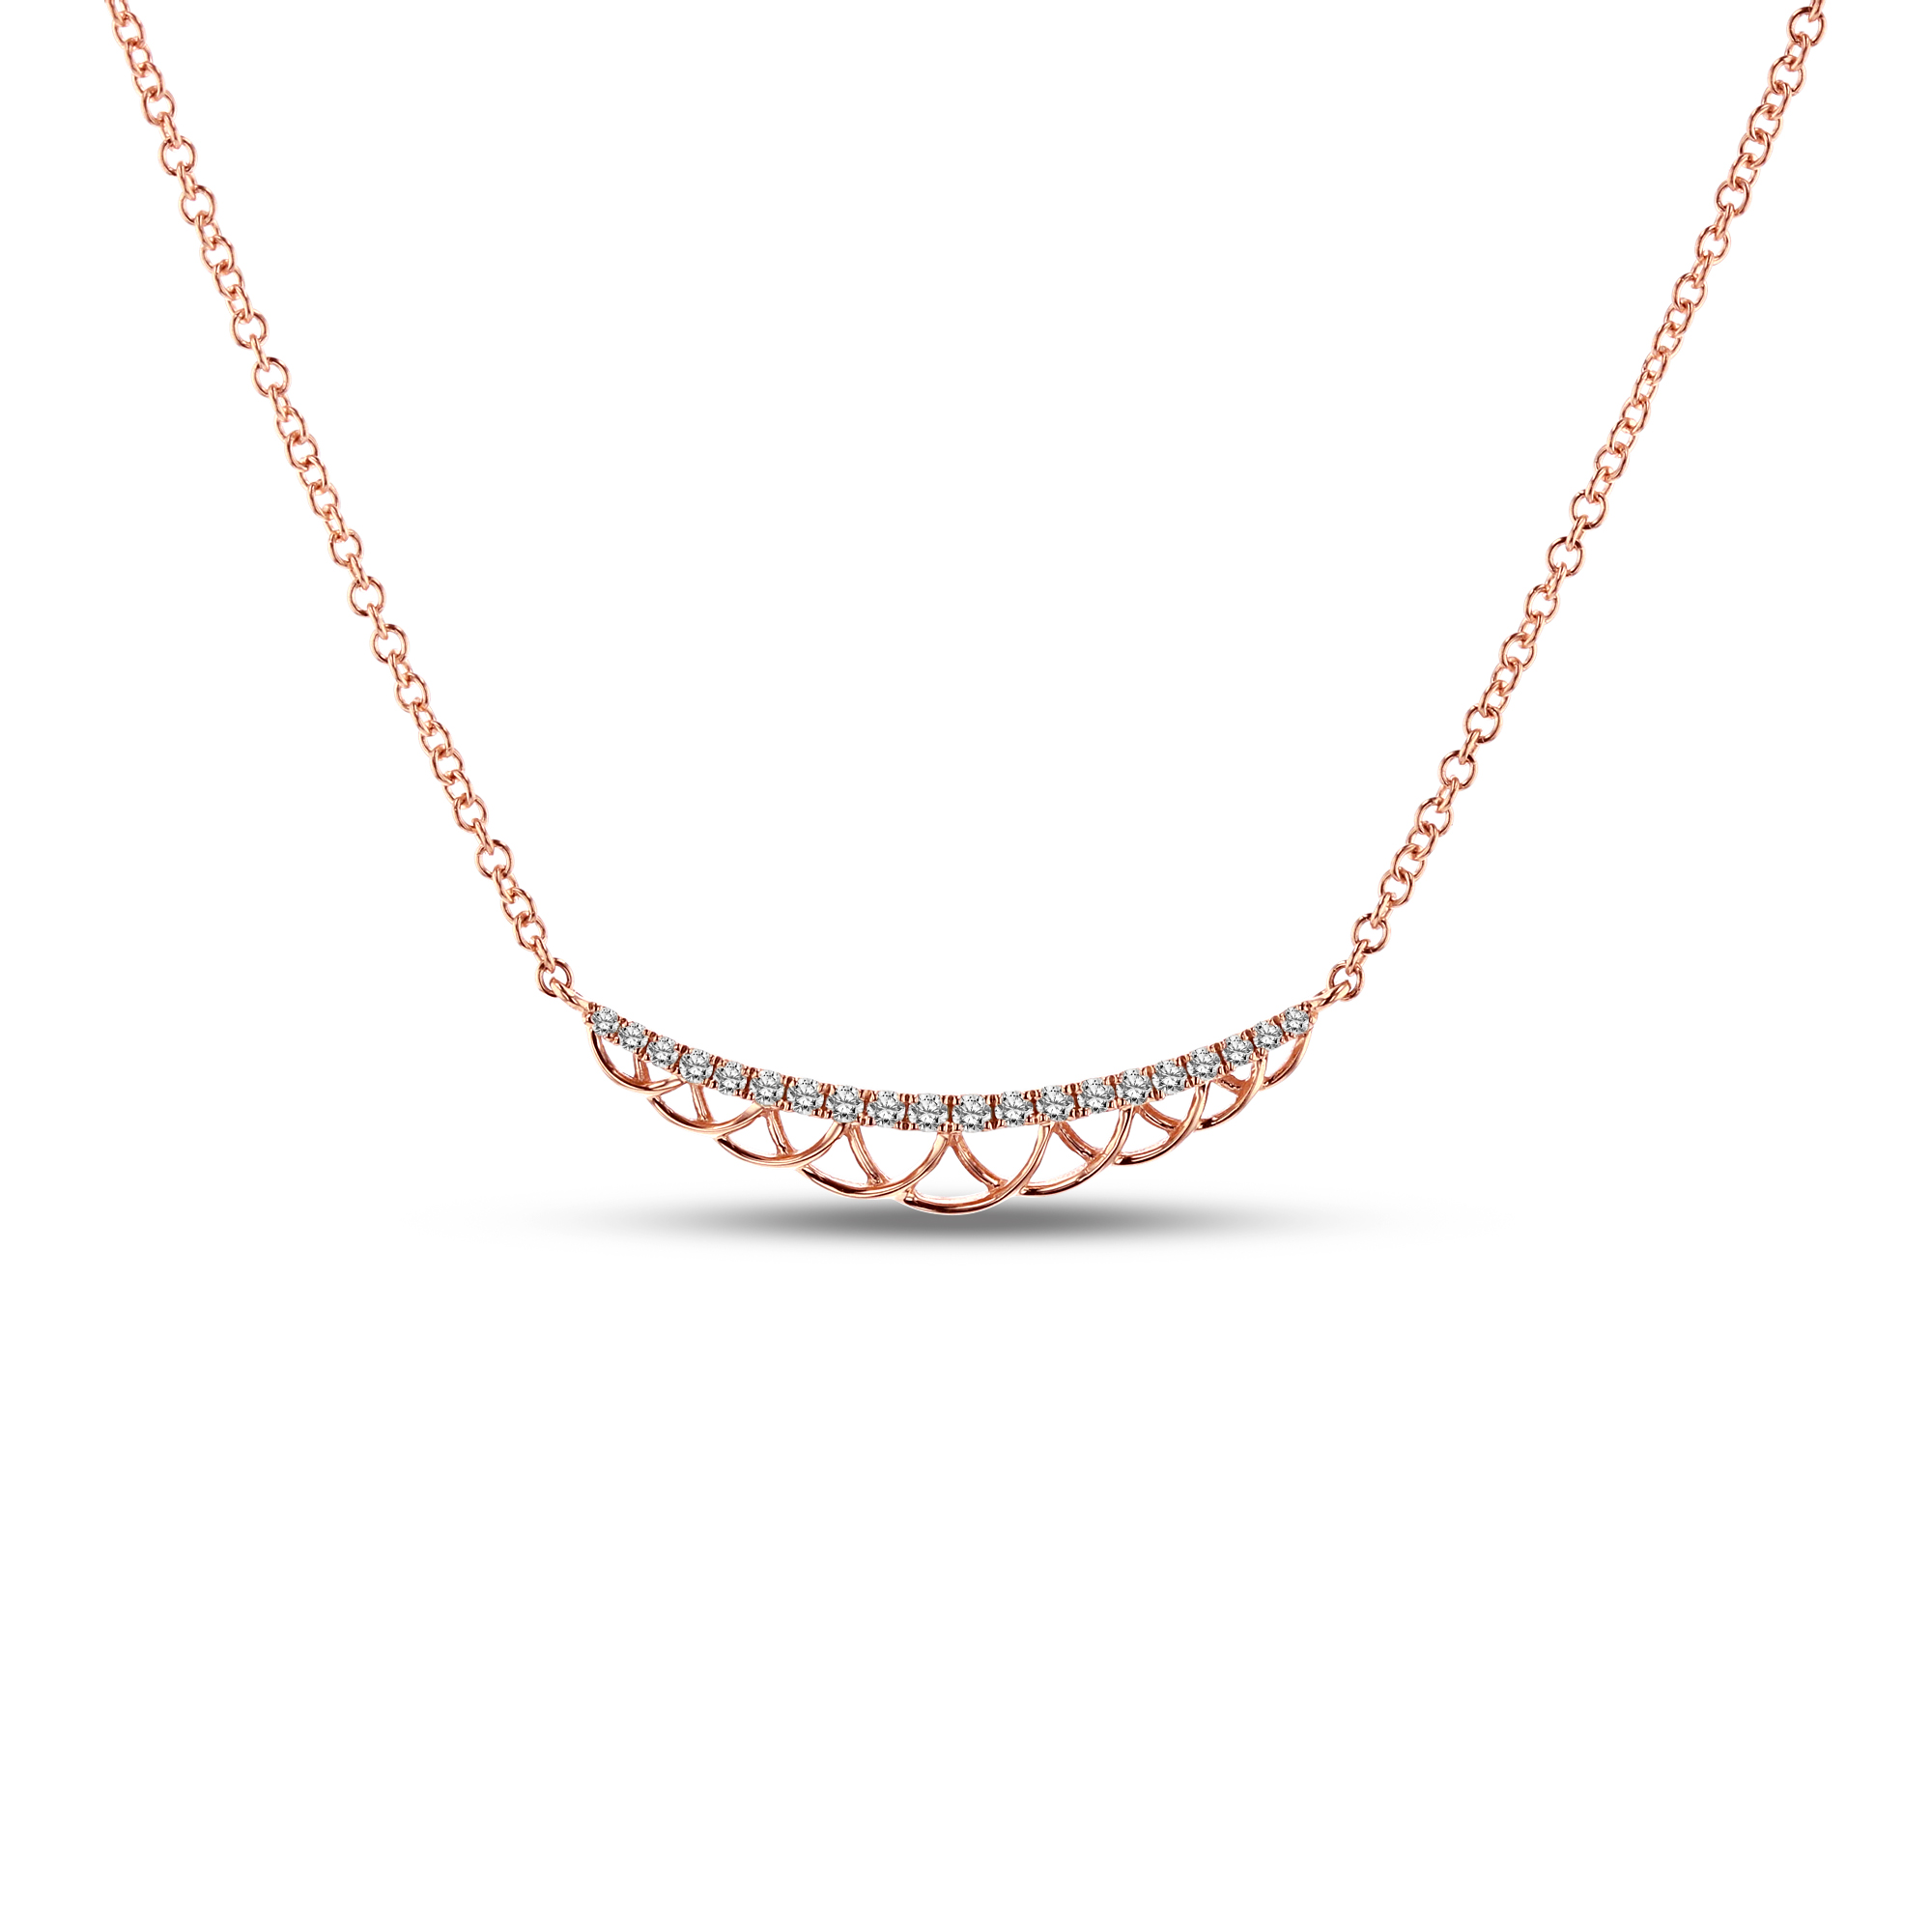 0.13ctw Diamond Fashion Necklace in 14k Rose Gold